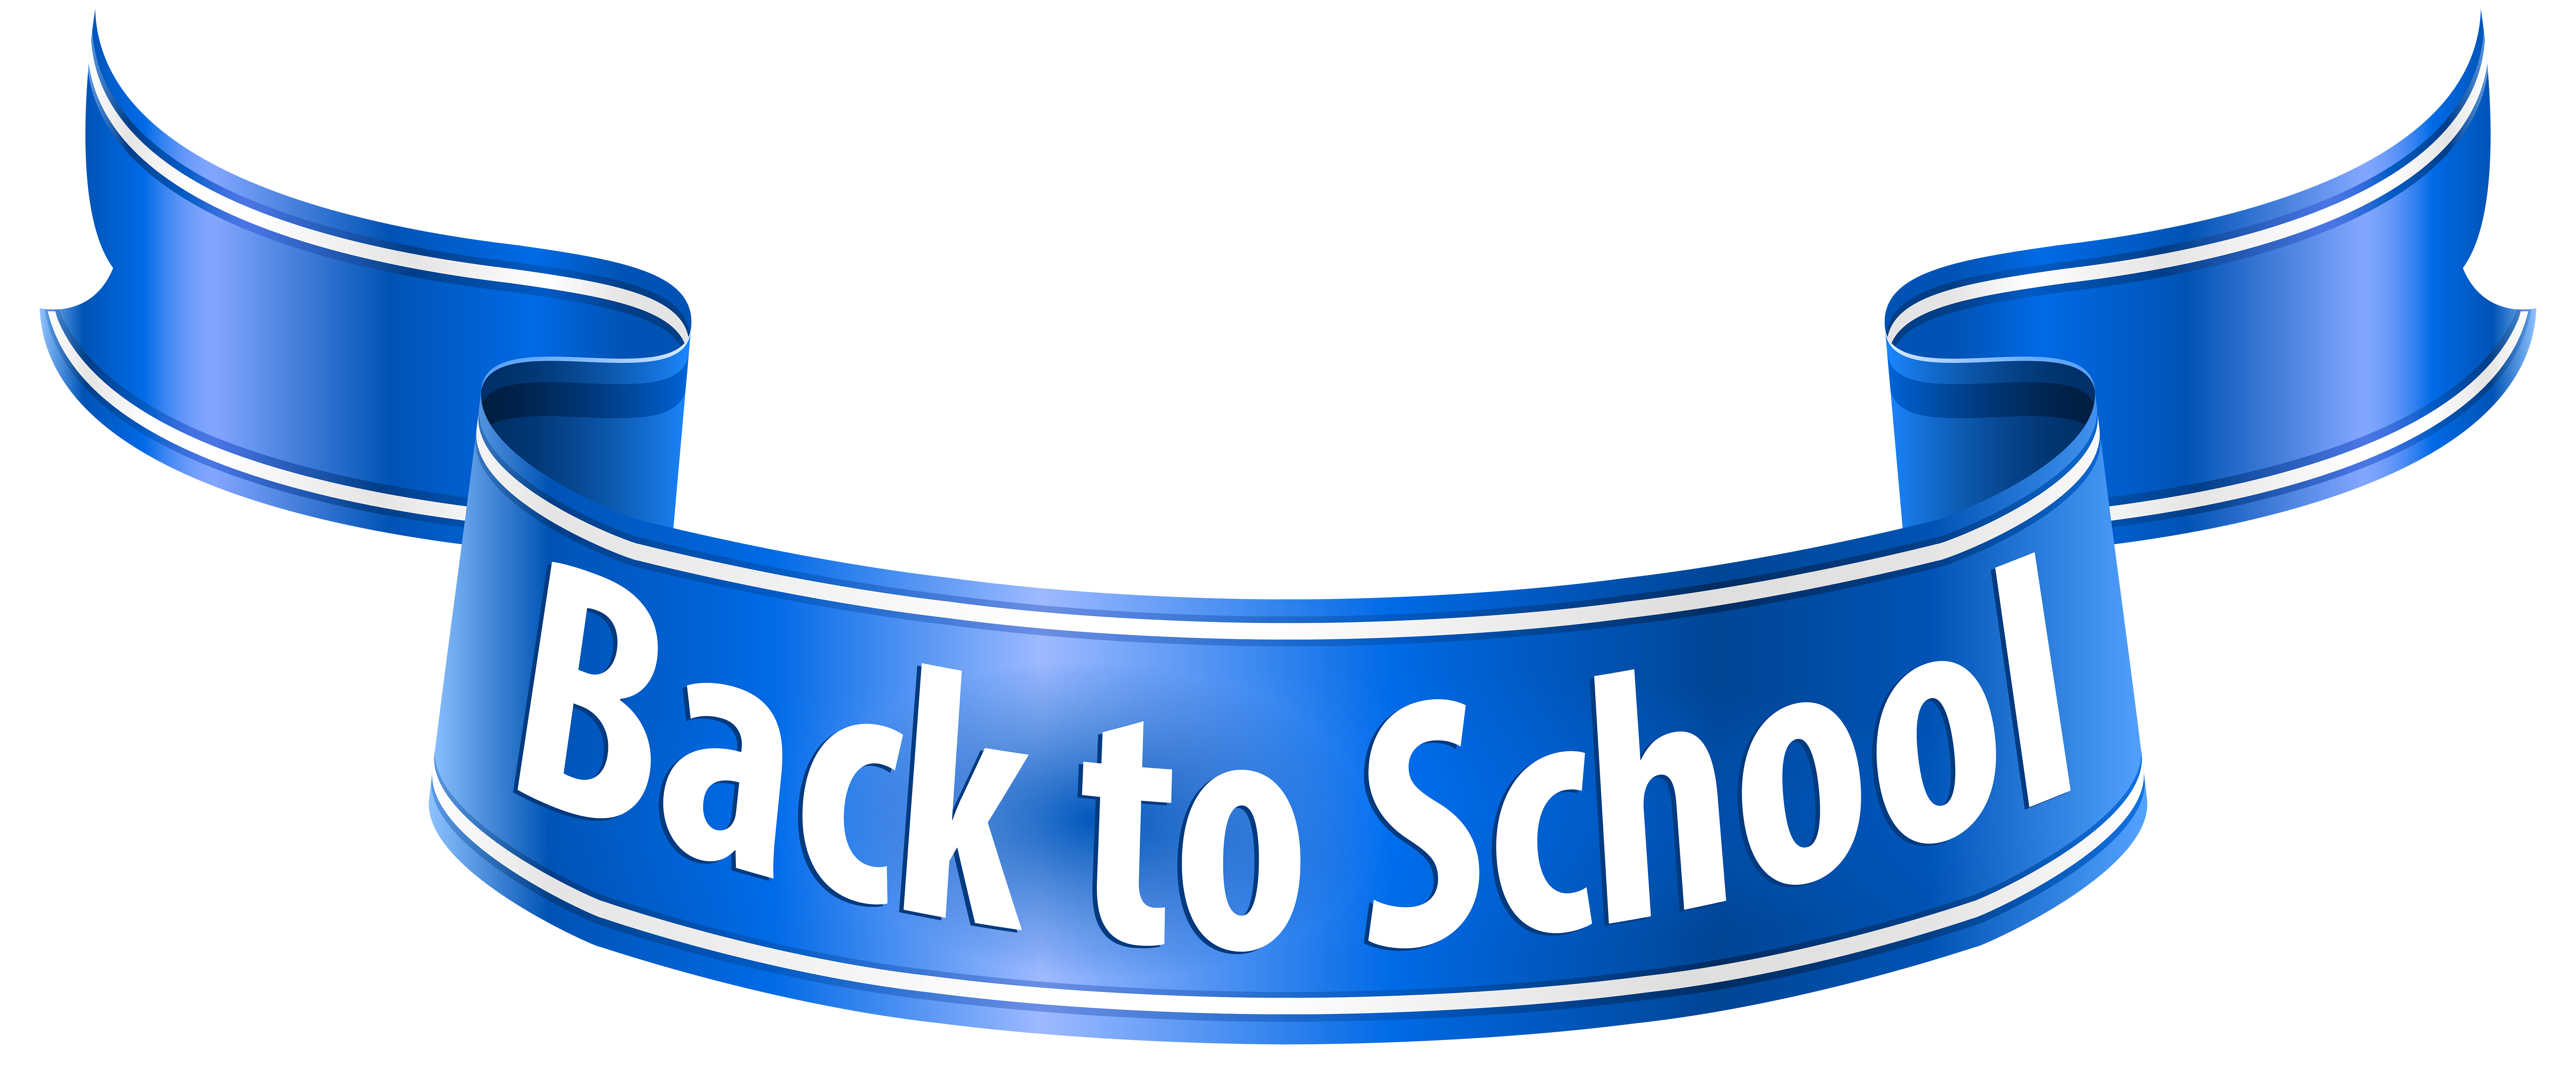 clipart of back to school - photo #11